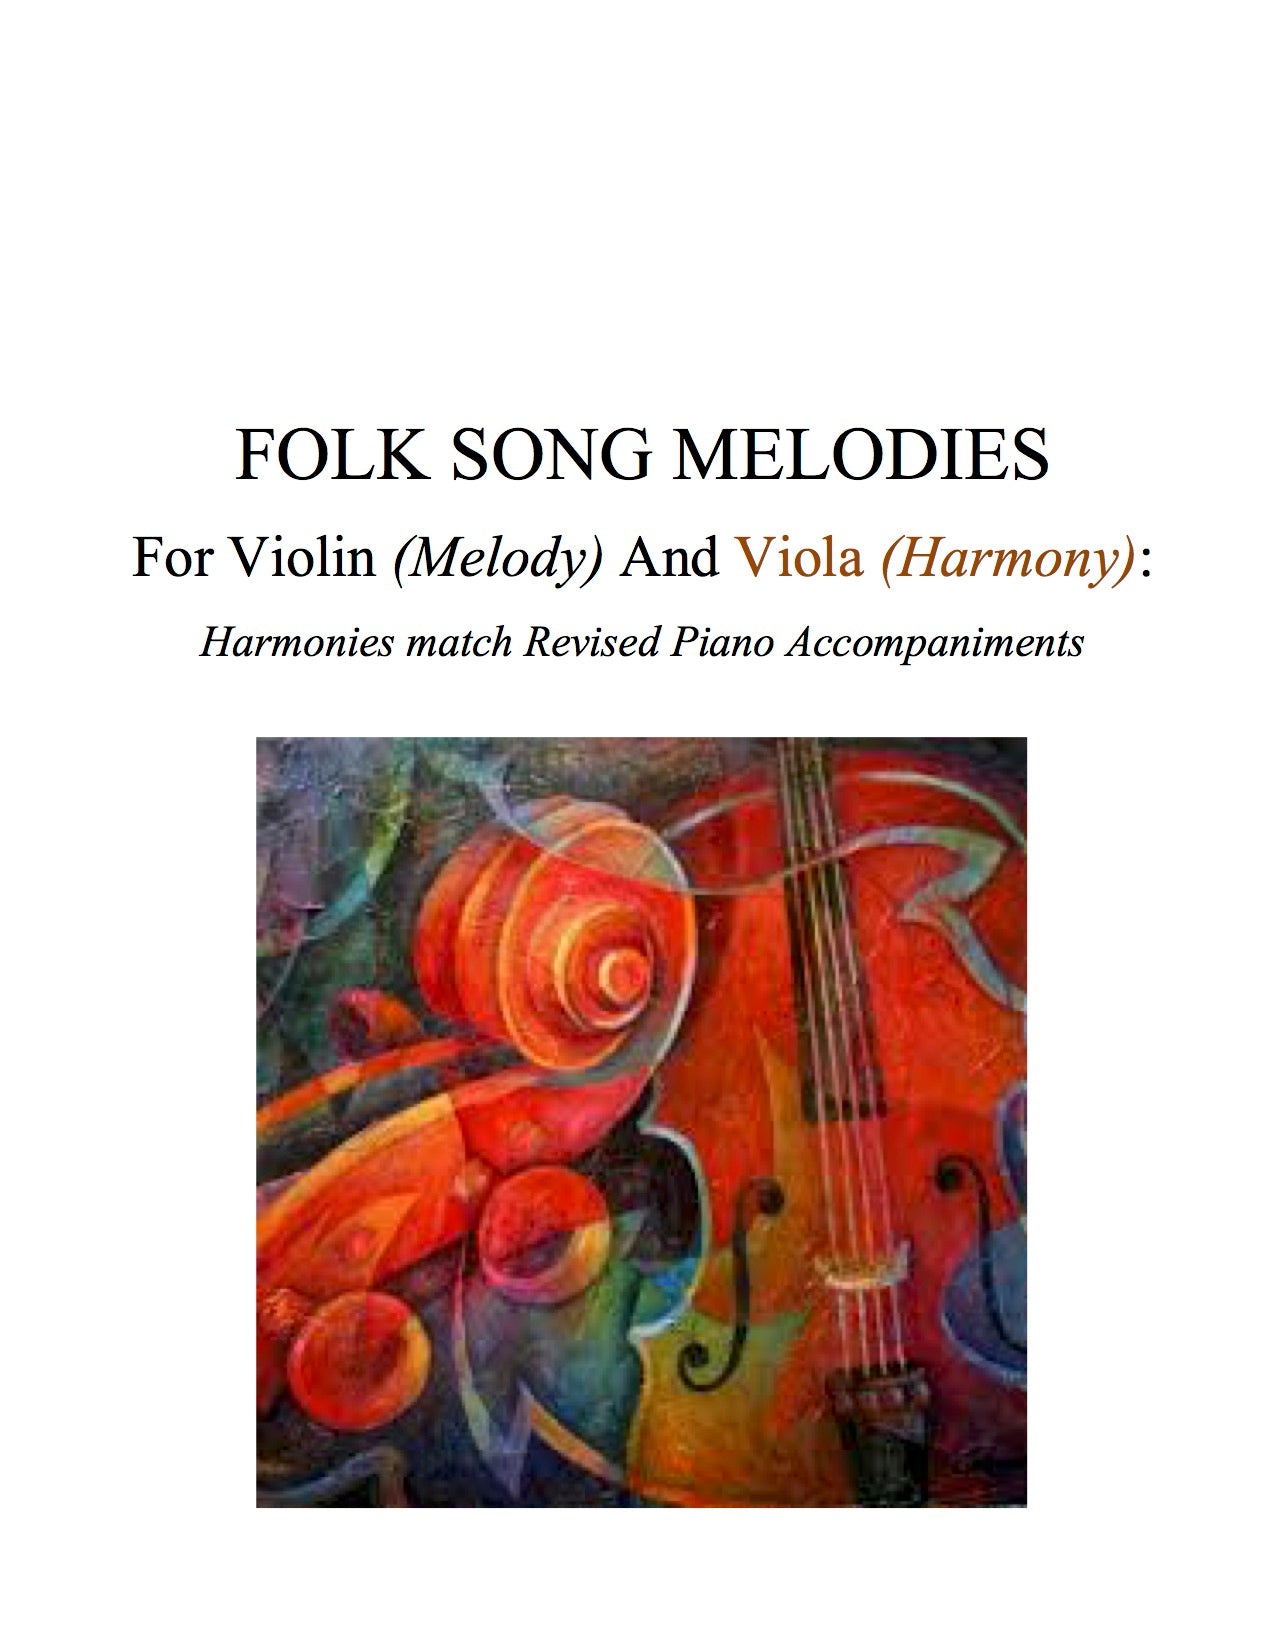 016 - Folk Song Melodies For Violin (Melody) and Viola (Harmony) Twinkle - Etude